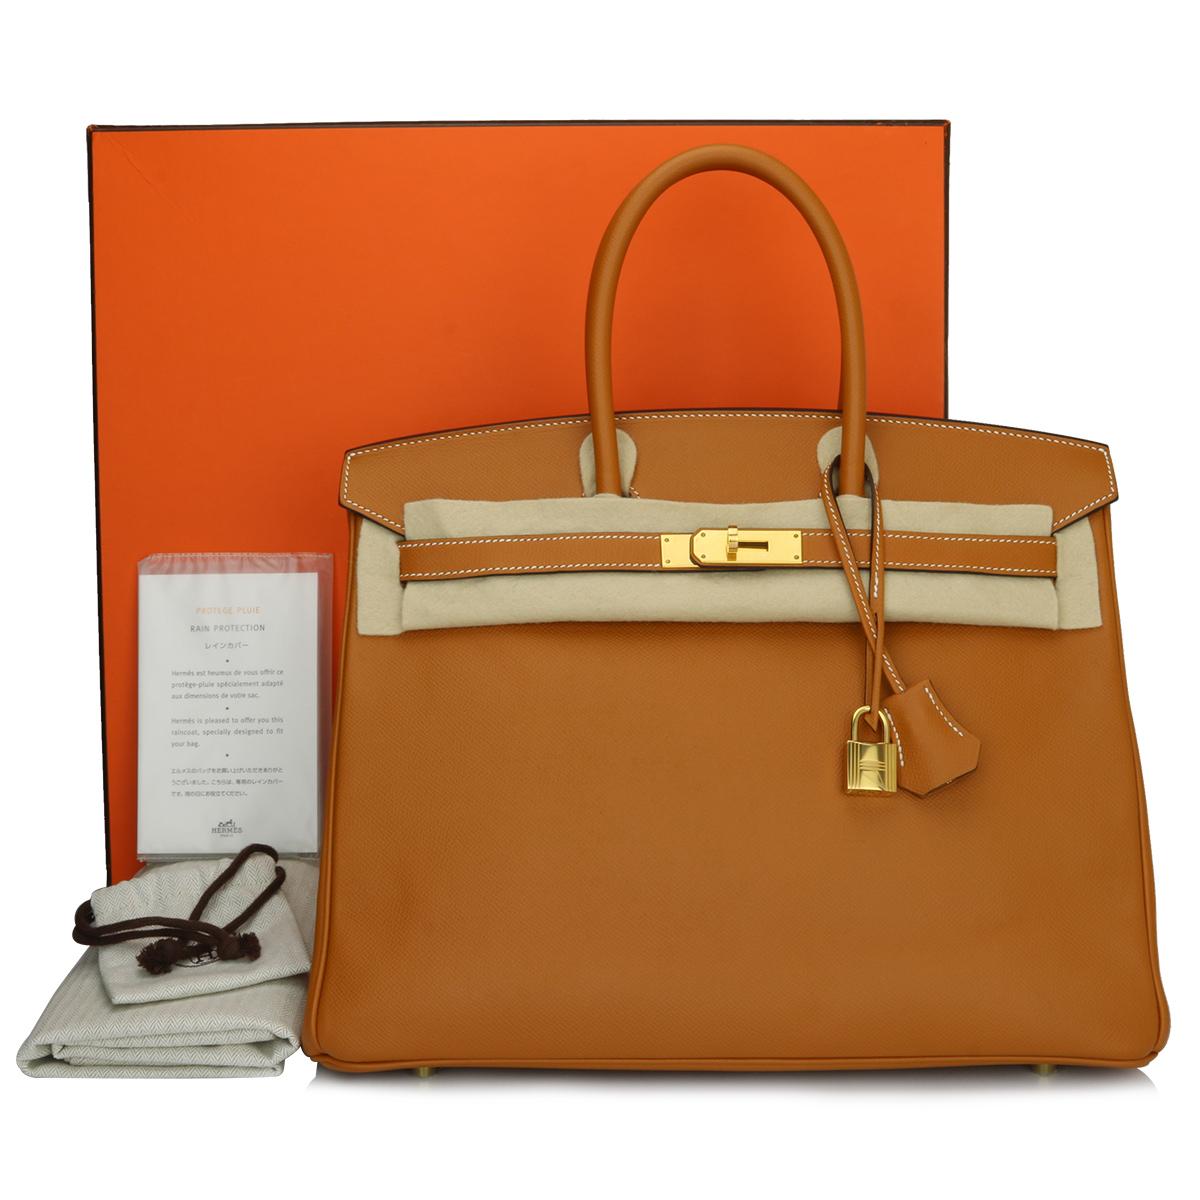 Authentic Hermès Birkin 35cm Toffee Epsom Leather with Gold Hardware Stamp A 2017.

This bag is still in a pristine condition. The leather still smells fresh as when new, along with it still holding to the original shape. The hardware still very